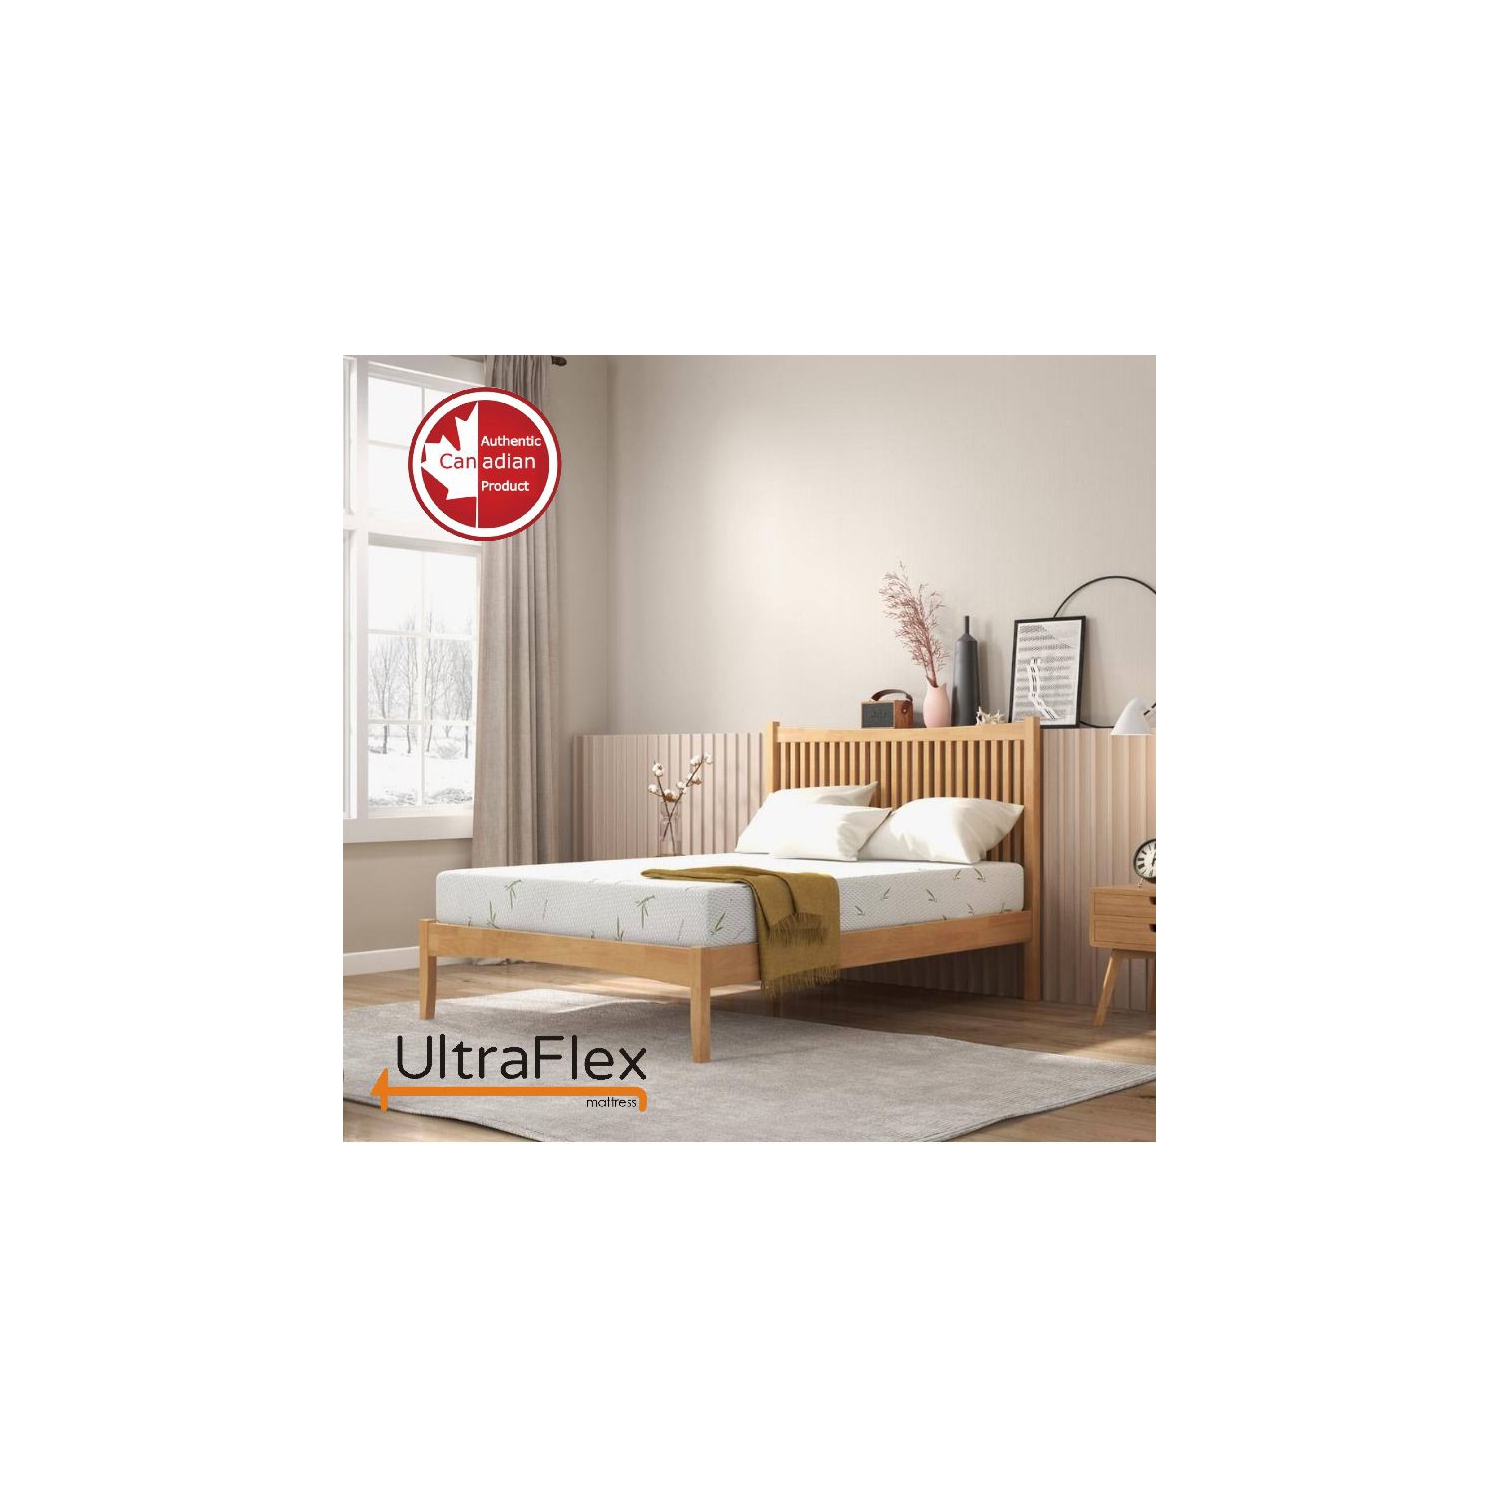 UltraFlex EasySleep Mattress- Canadian-Made Medium Firm Gel Infused Reversible Comfort, Pressure Relief, Bamboo Cover, CertiPUR-US® Certified Foam, Made in Canada- Twin/Single Size